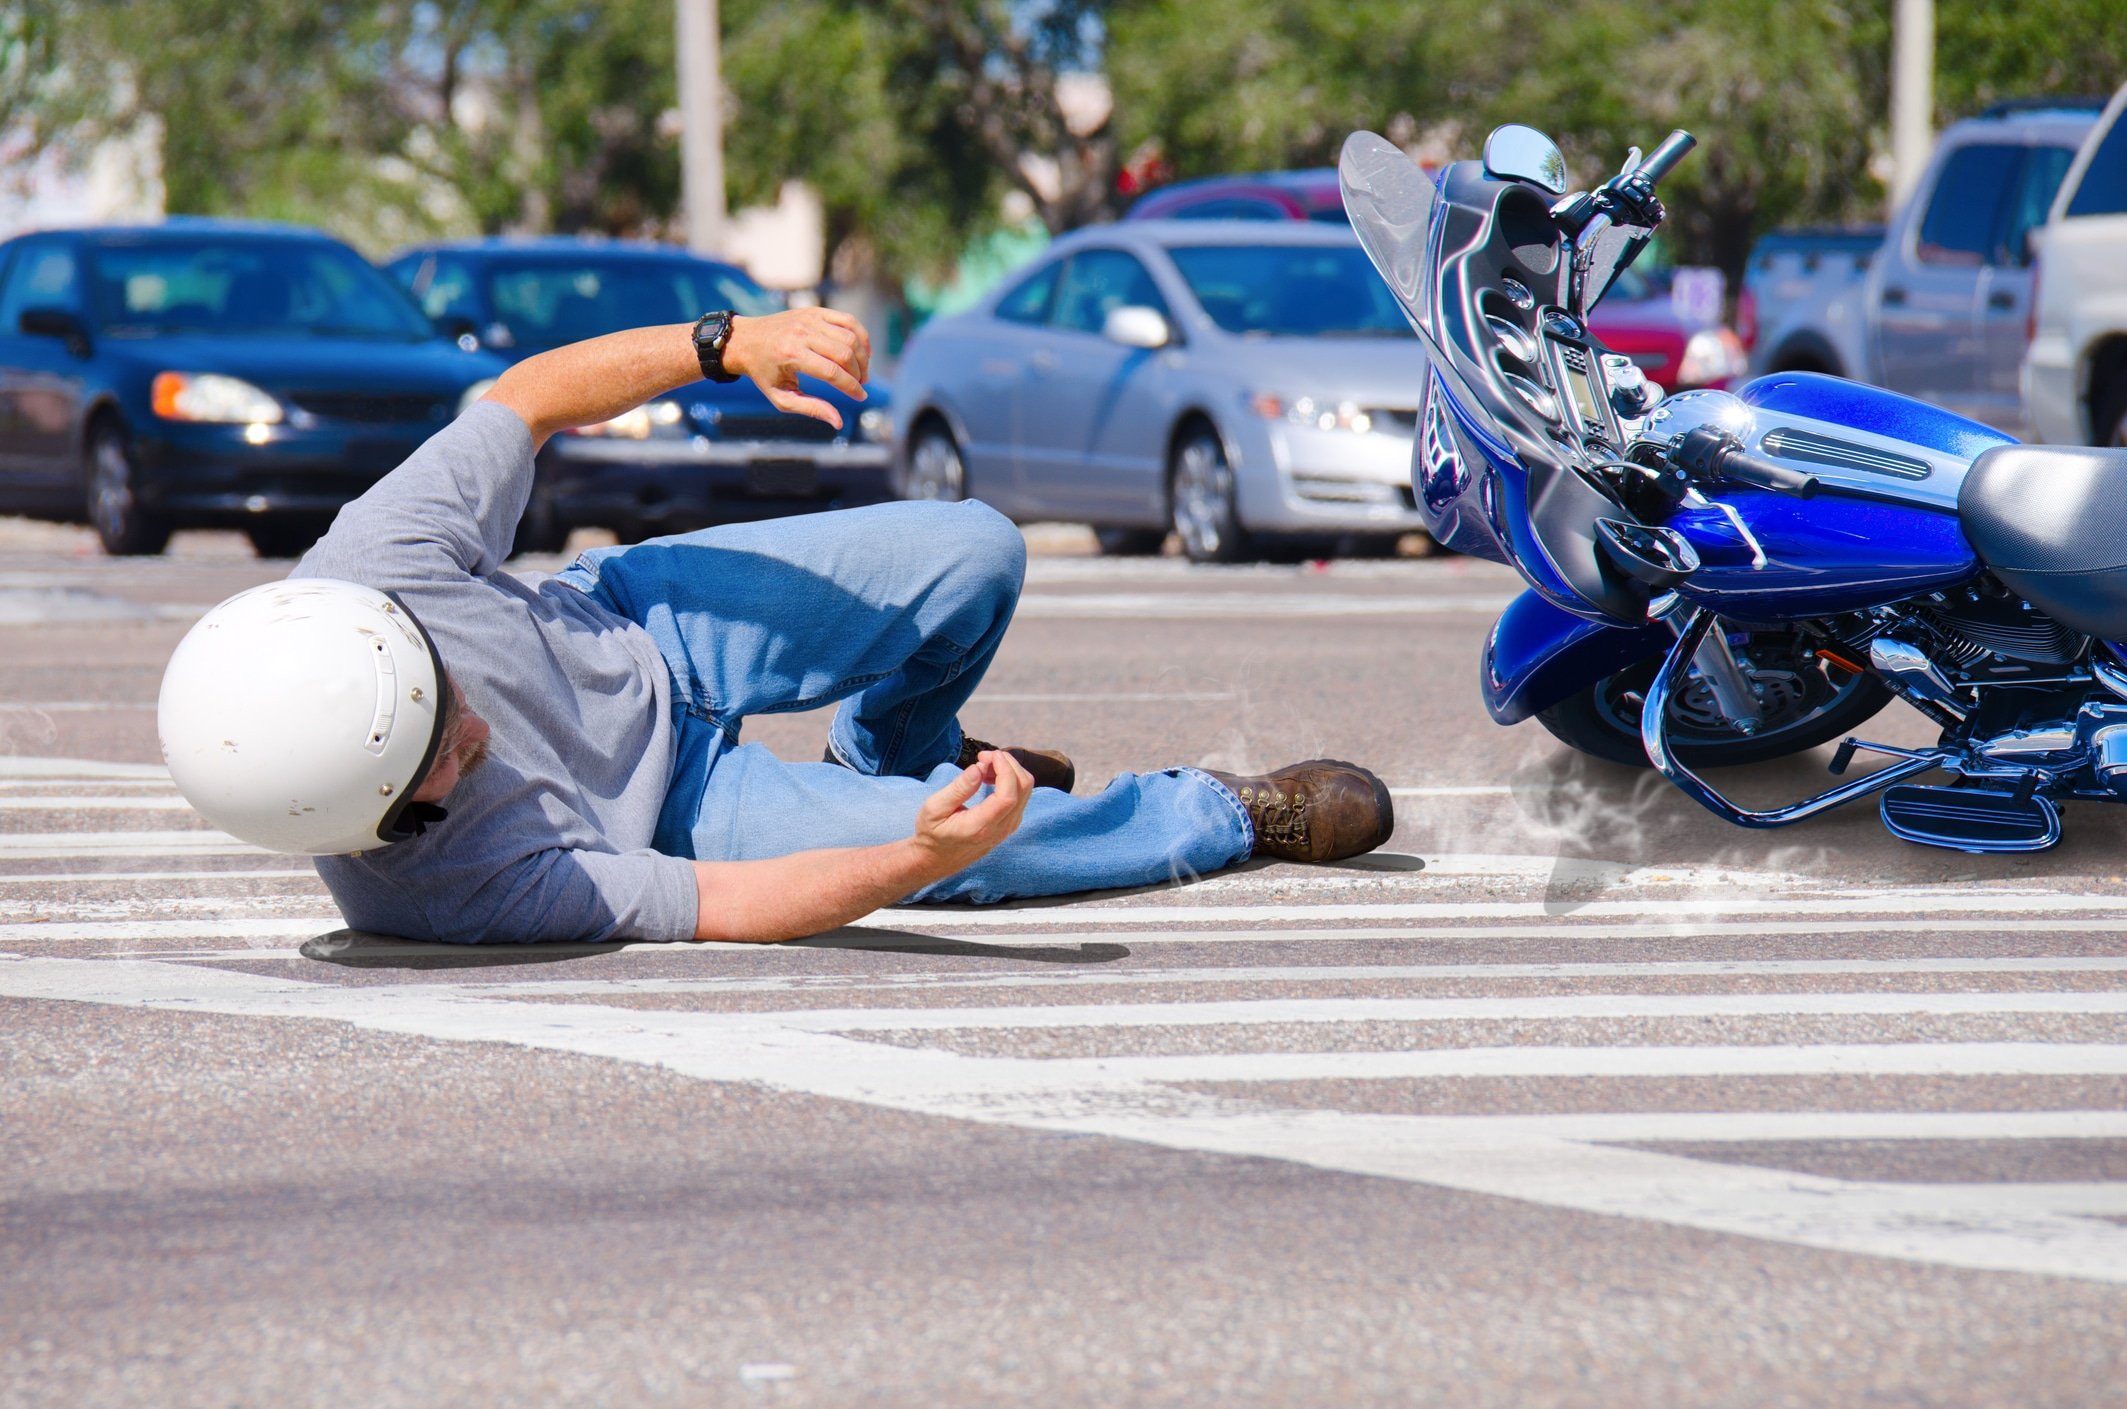 Life Insurance for Motorcycle Riders: What Rates to Expect